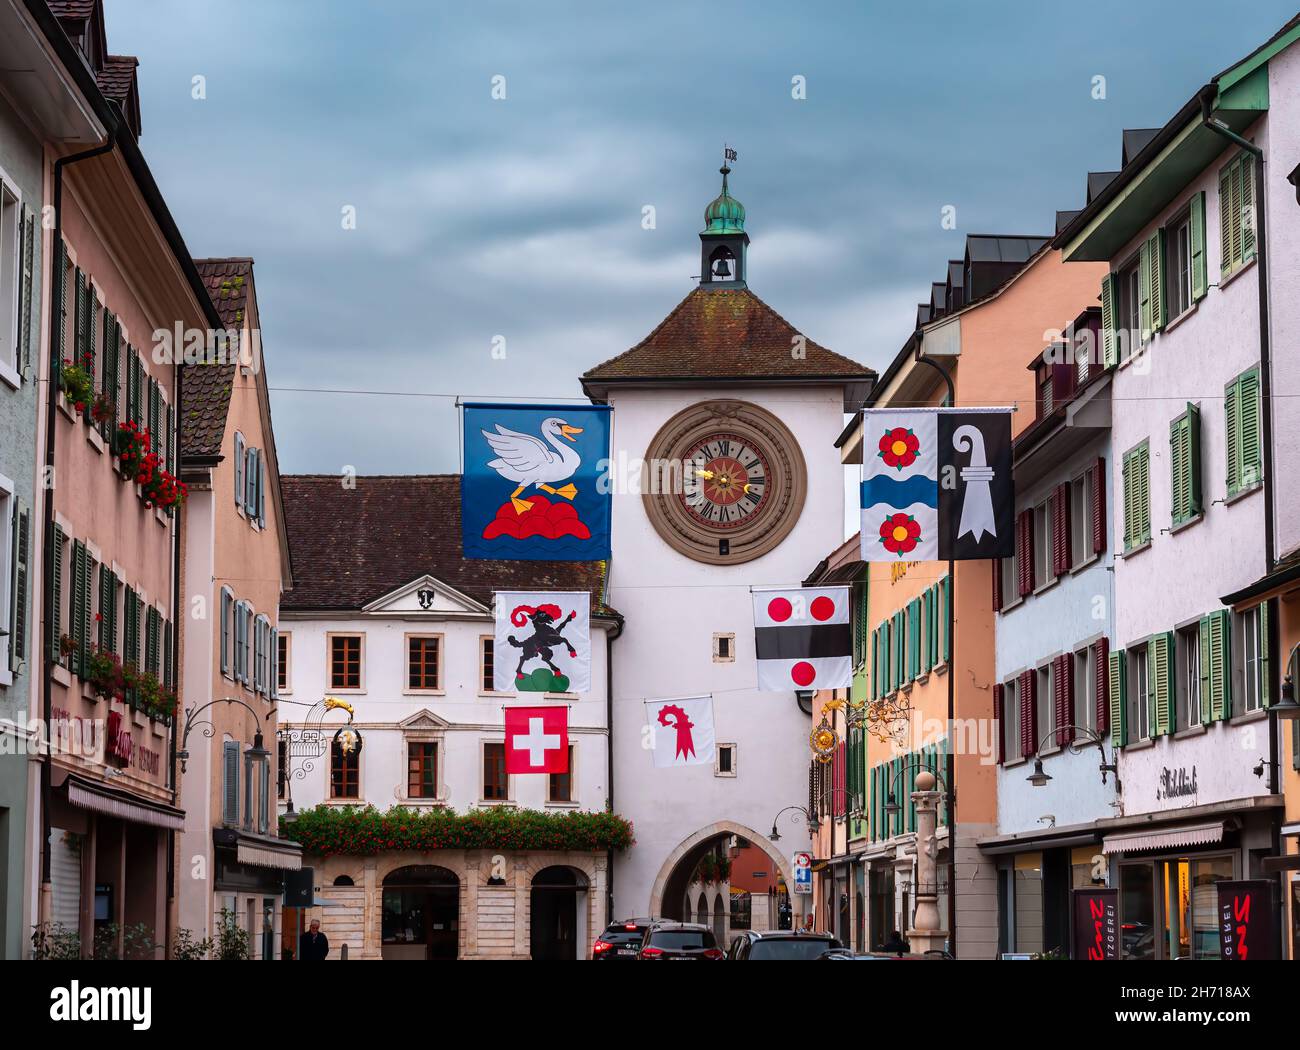 Laufen, Switzerland - October 19, 2021: The old town of the Swiss medieval town of Laufen Stock Photo